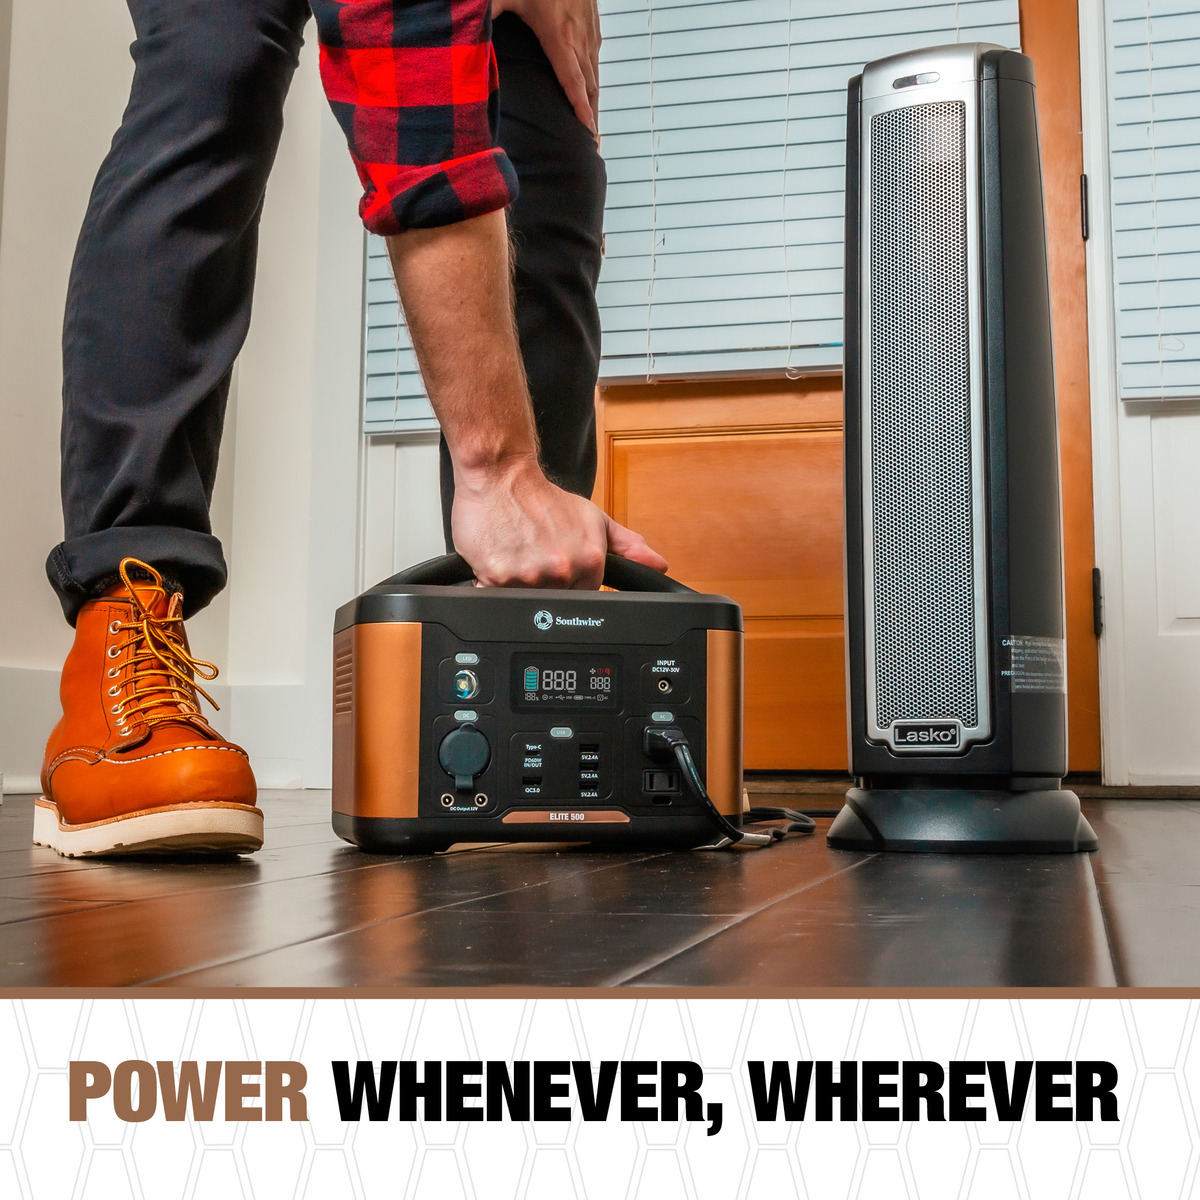 PORTABLE POWER STATION 500 WITH 515 WATT-HOURS OF POWER, FEATURES PURE SINE WAVE, 5 USB PORTS, 2 AC OUTLETS, 12V DC OUTLET. MOLDED HANDLE AND 11.46 LBS